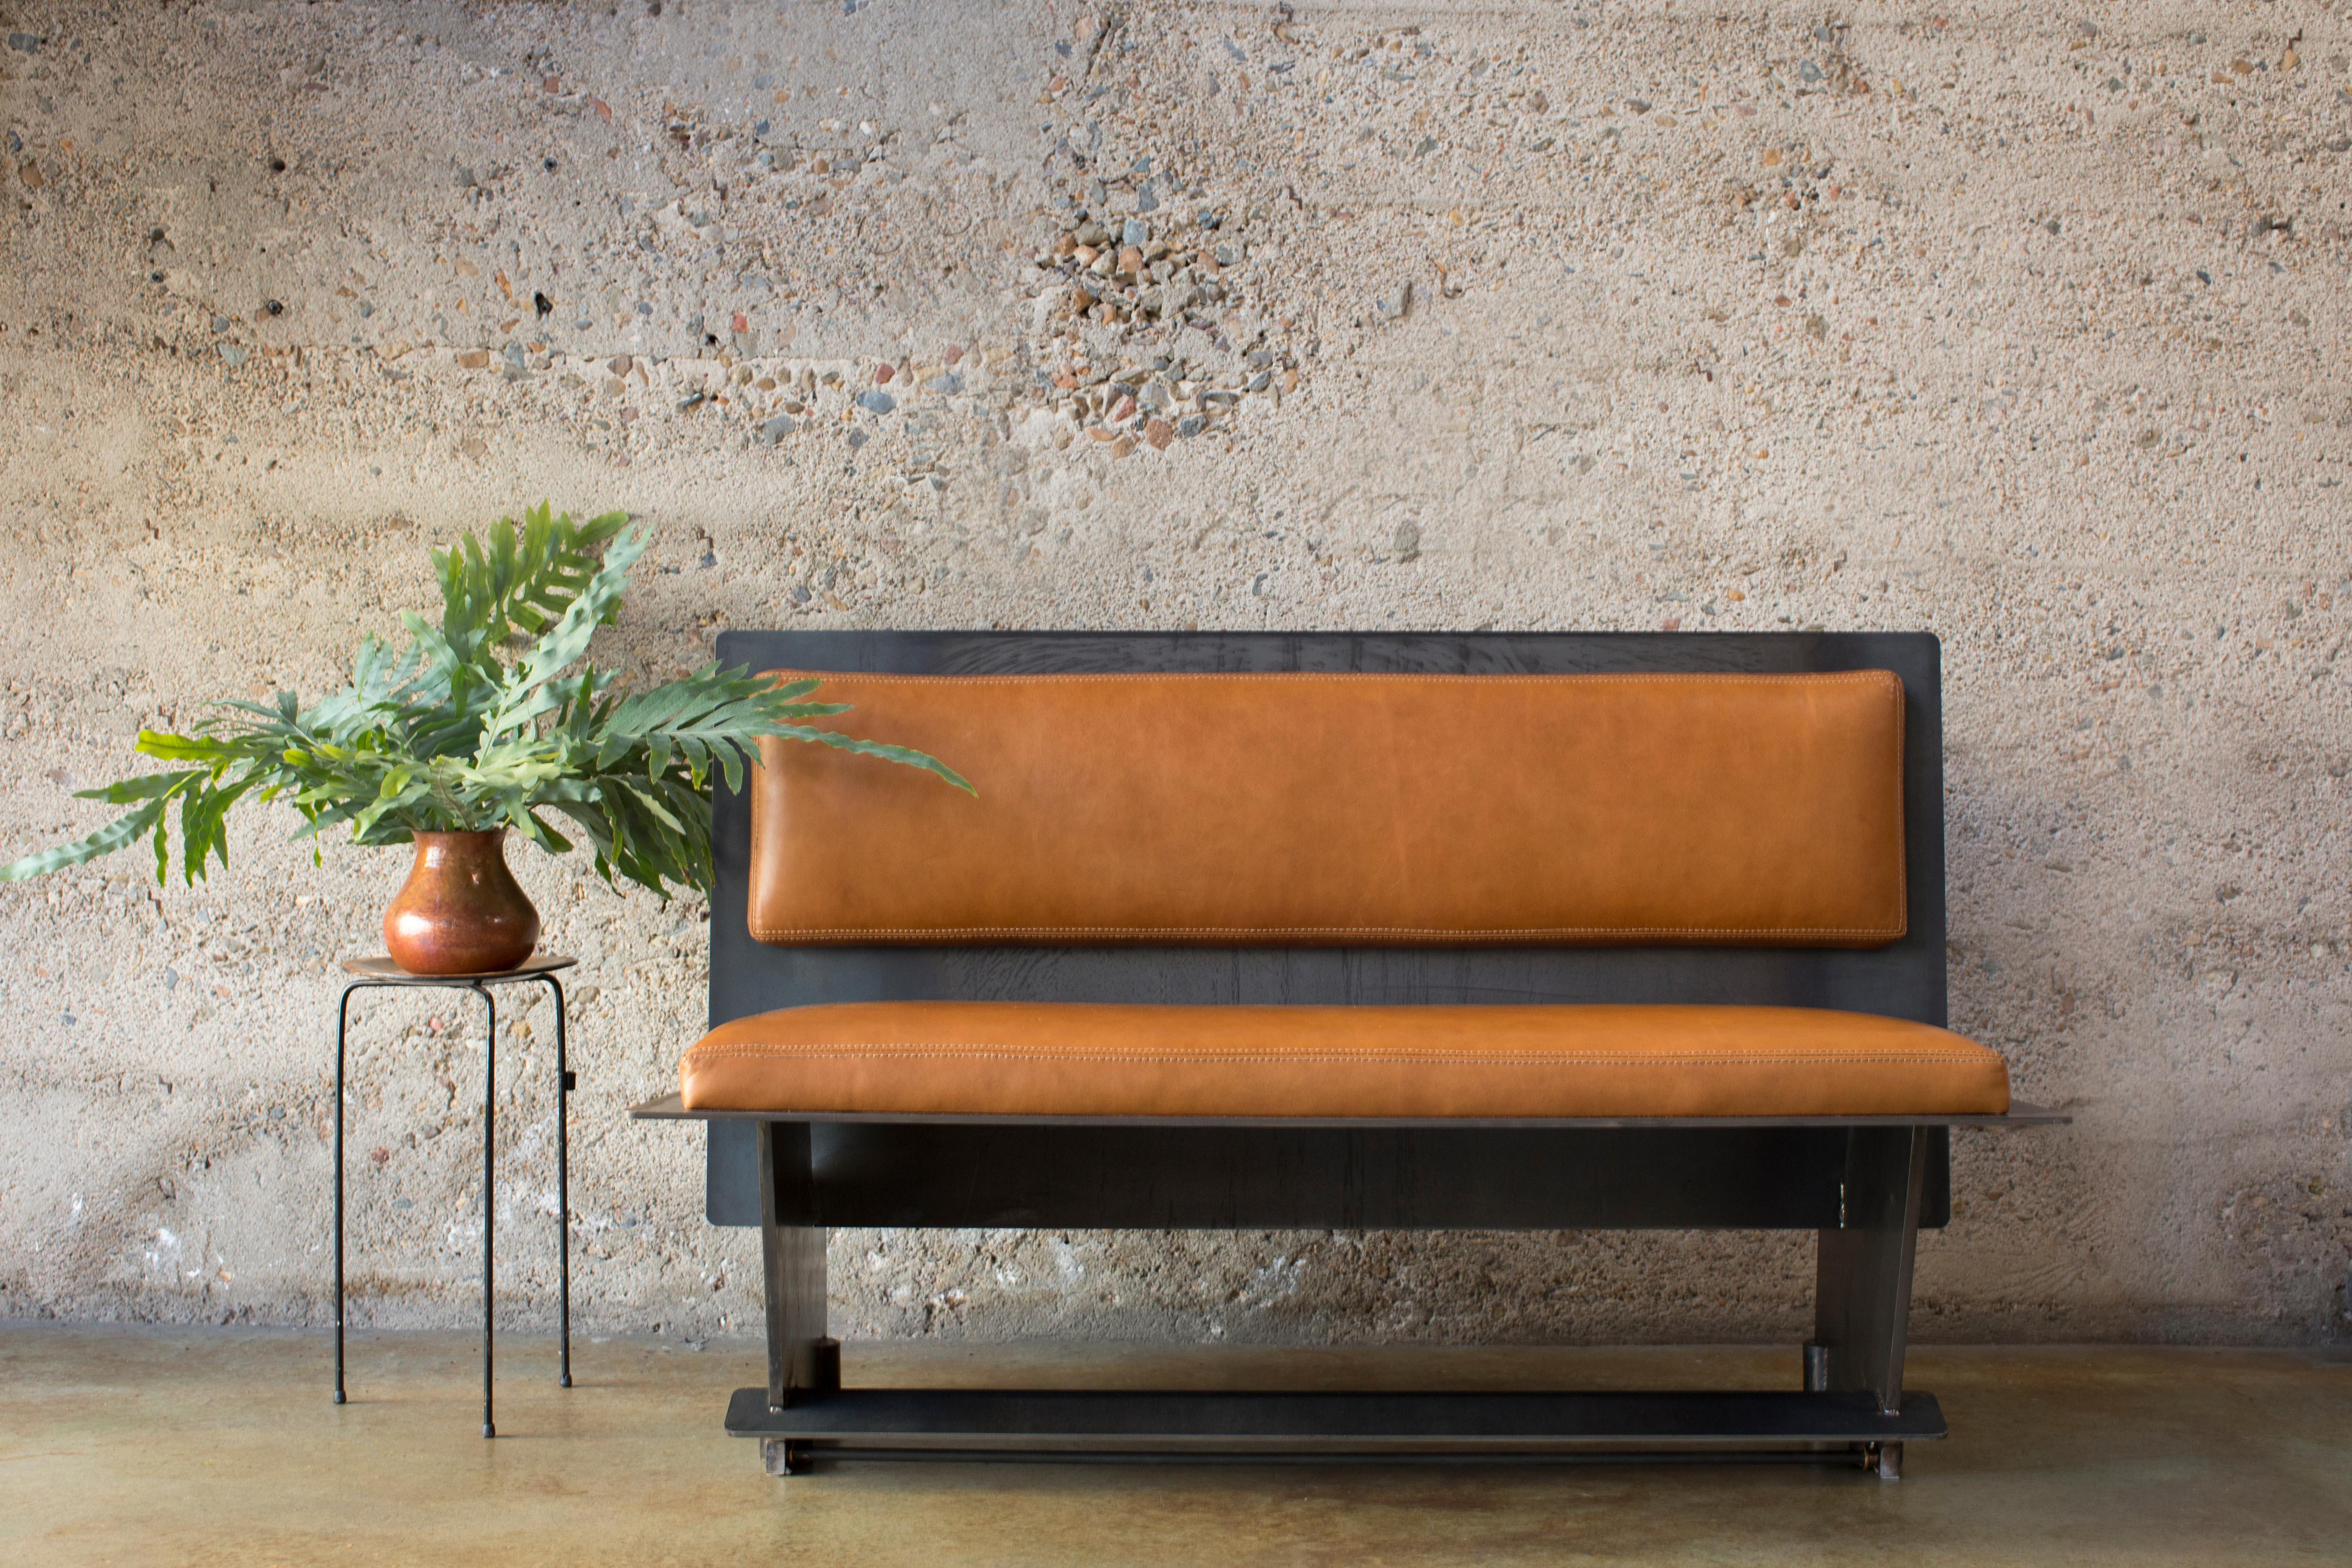 Designed by Basile Built, renowned Design-Fabrication Studio based in San Diego, California, this industrial heavy duty bench is fabricated from hot-rolled steel with leather cushions. Featuring a minimalist aesthetic, it can be used as a